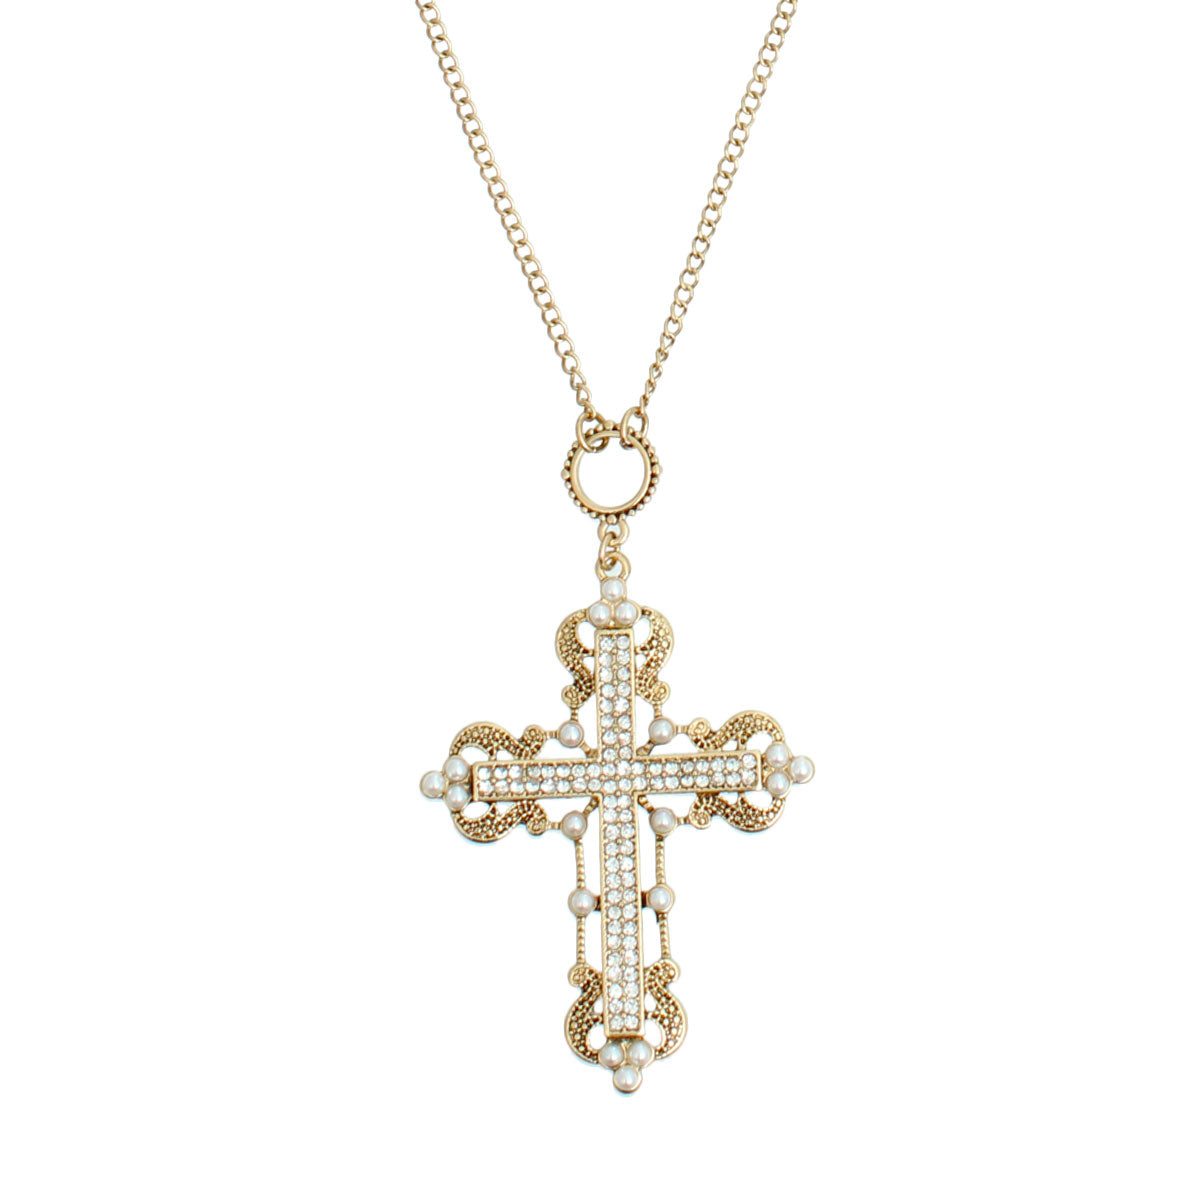 Burnished Gold Engraved Pearl Cross Necklace